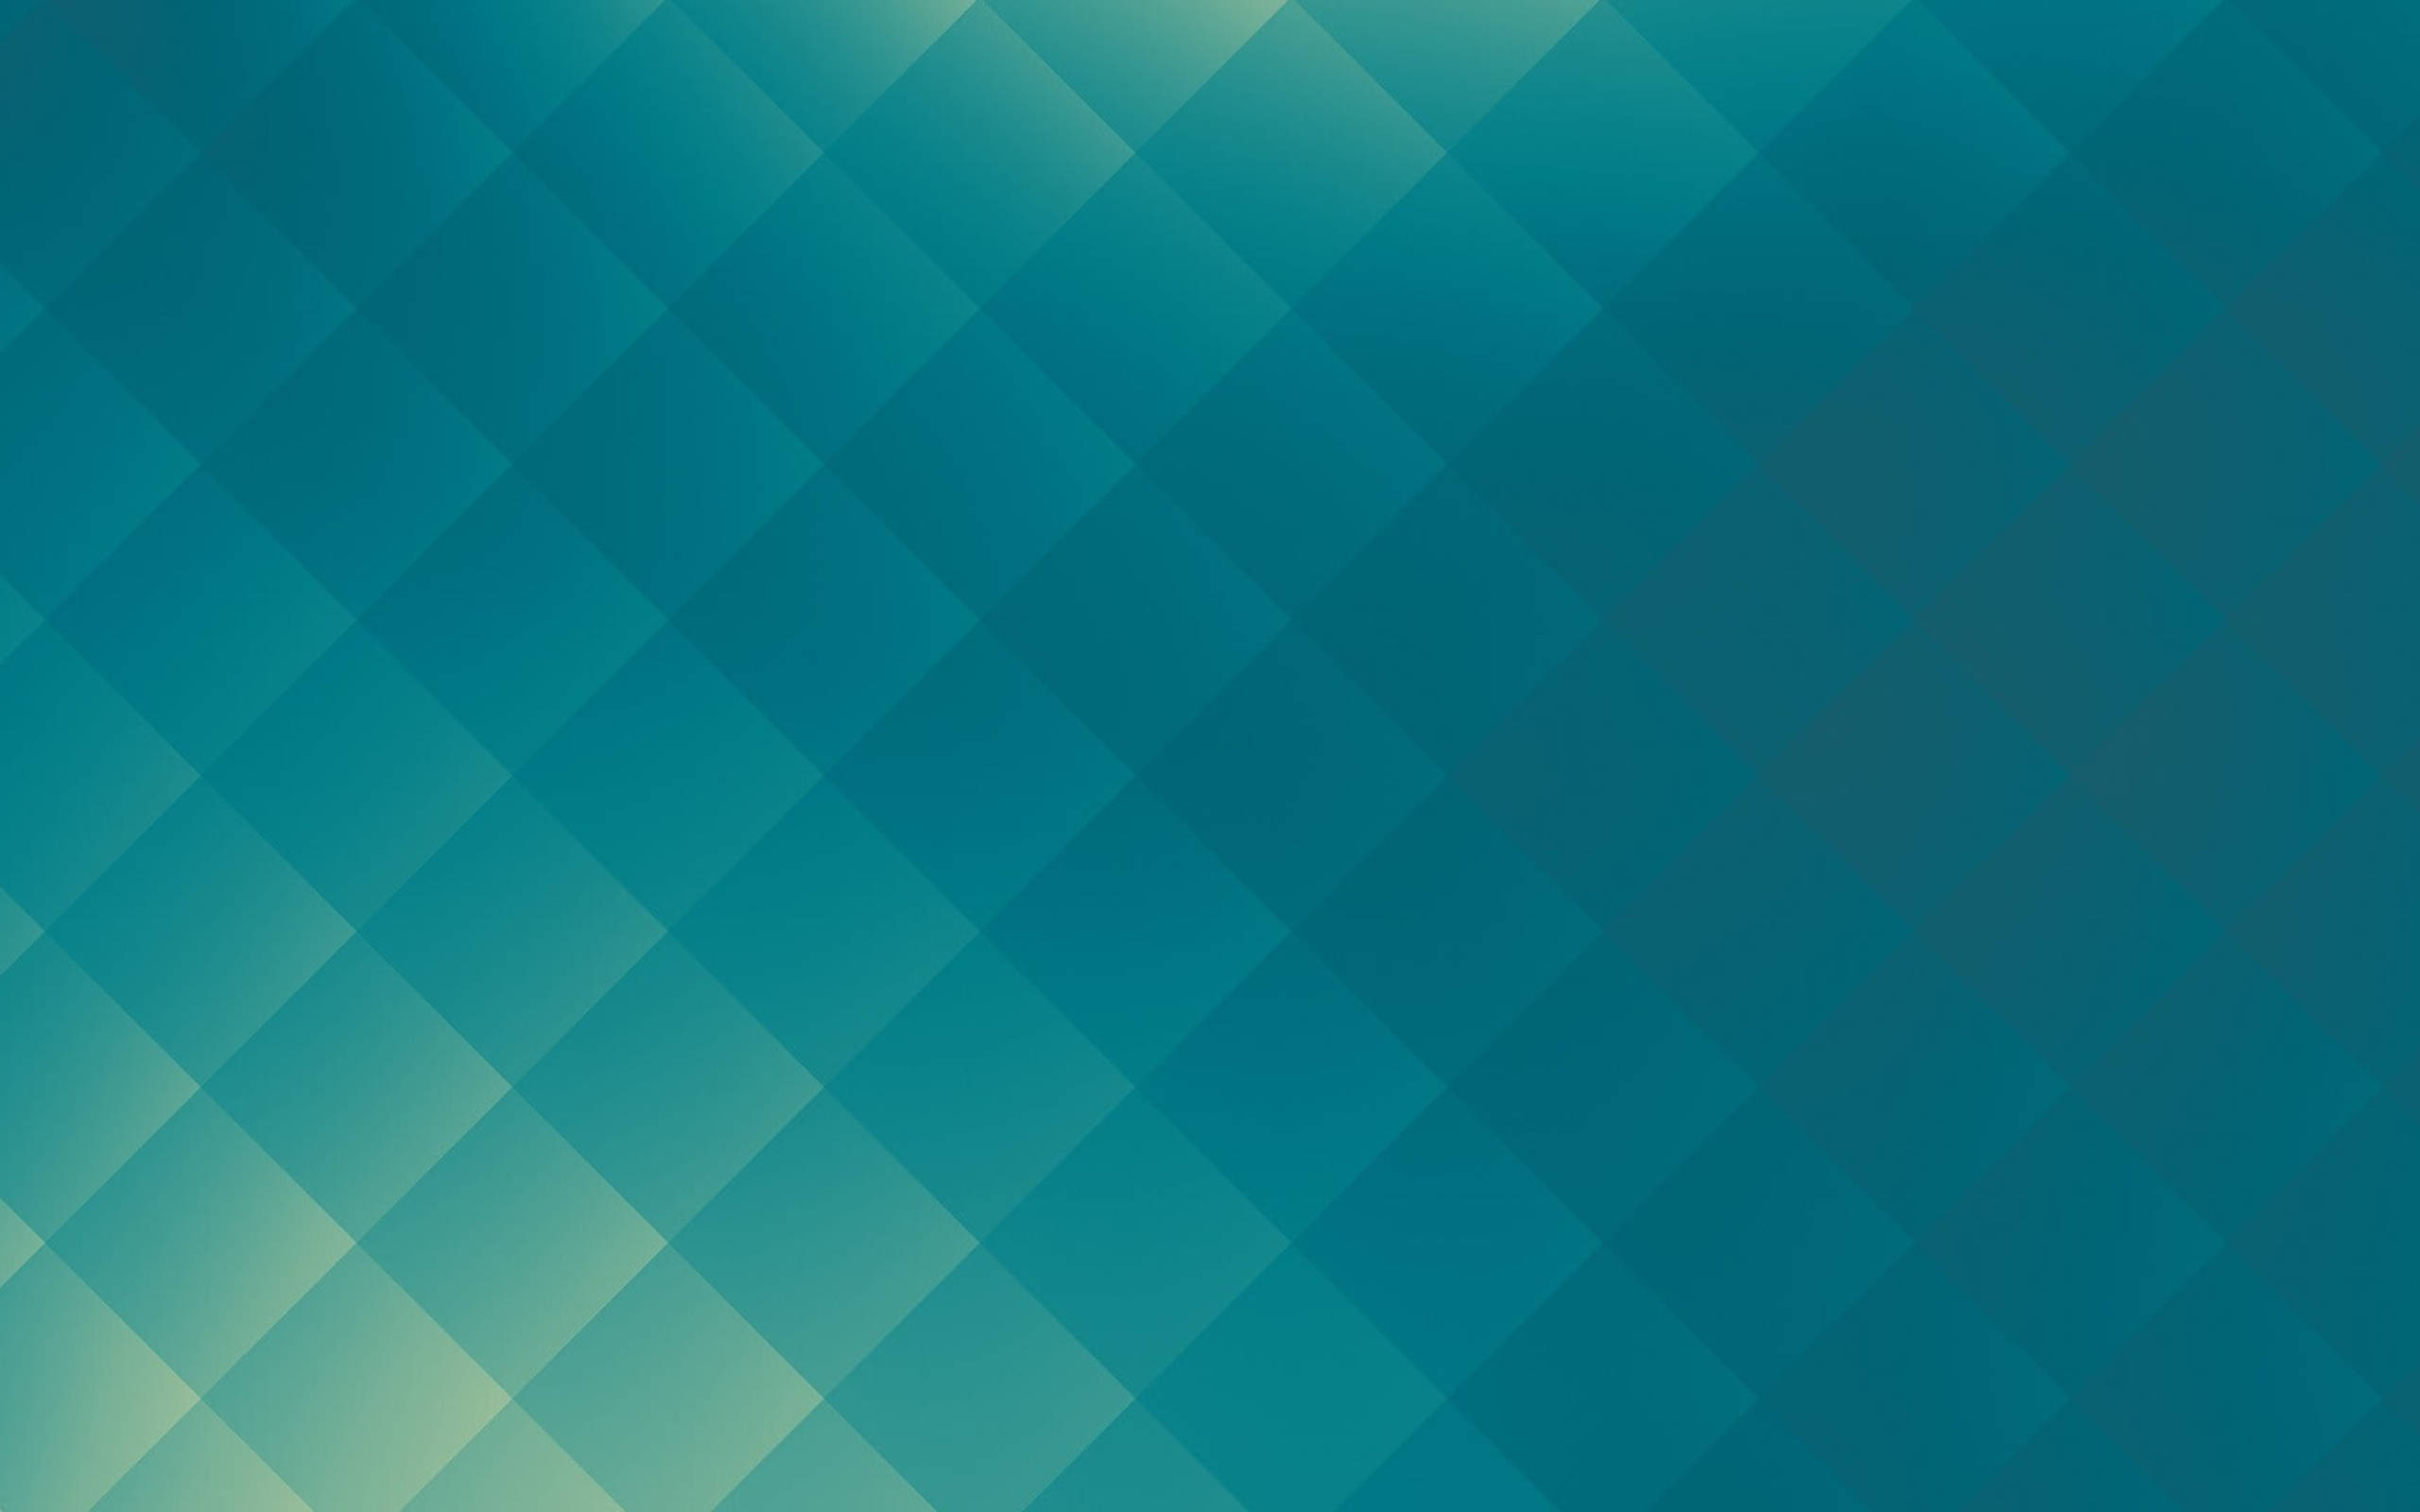 Download 2k Teal And Turquoise Gradient Wallpaper